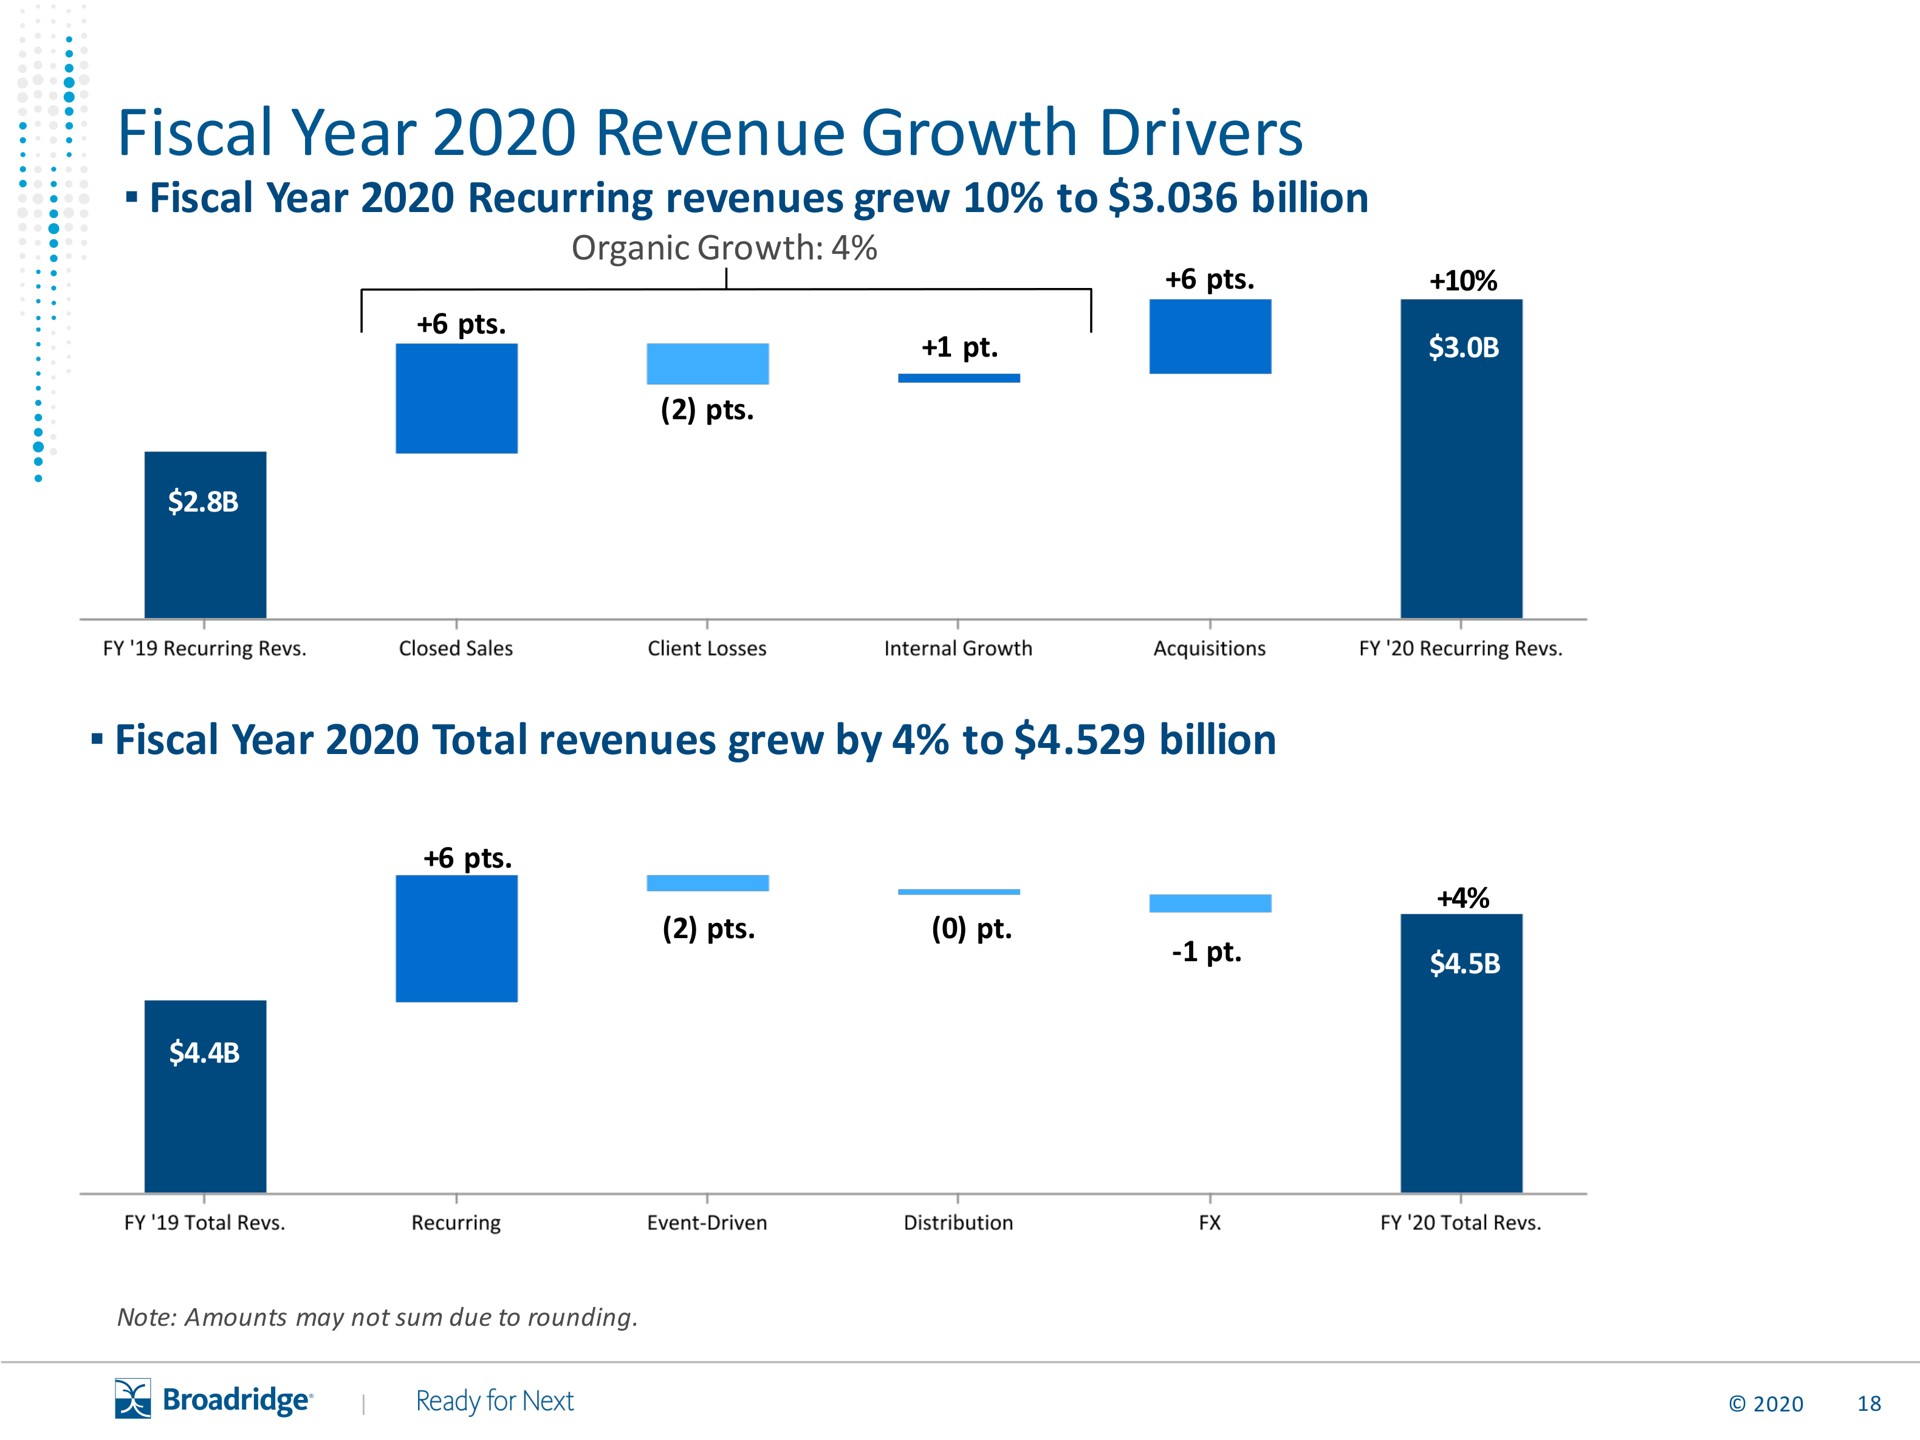 fiscal year revenue growth drivers | Broadridge Financial Solutions